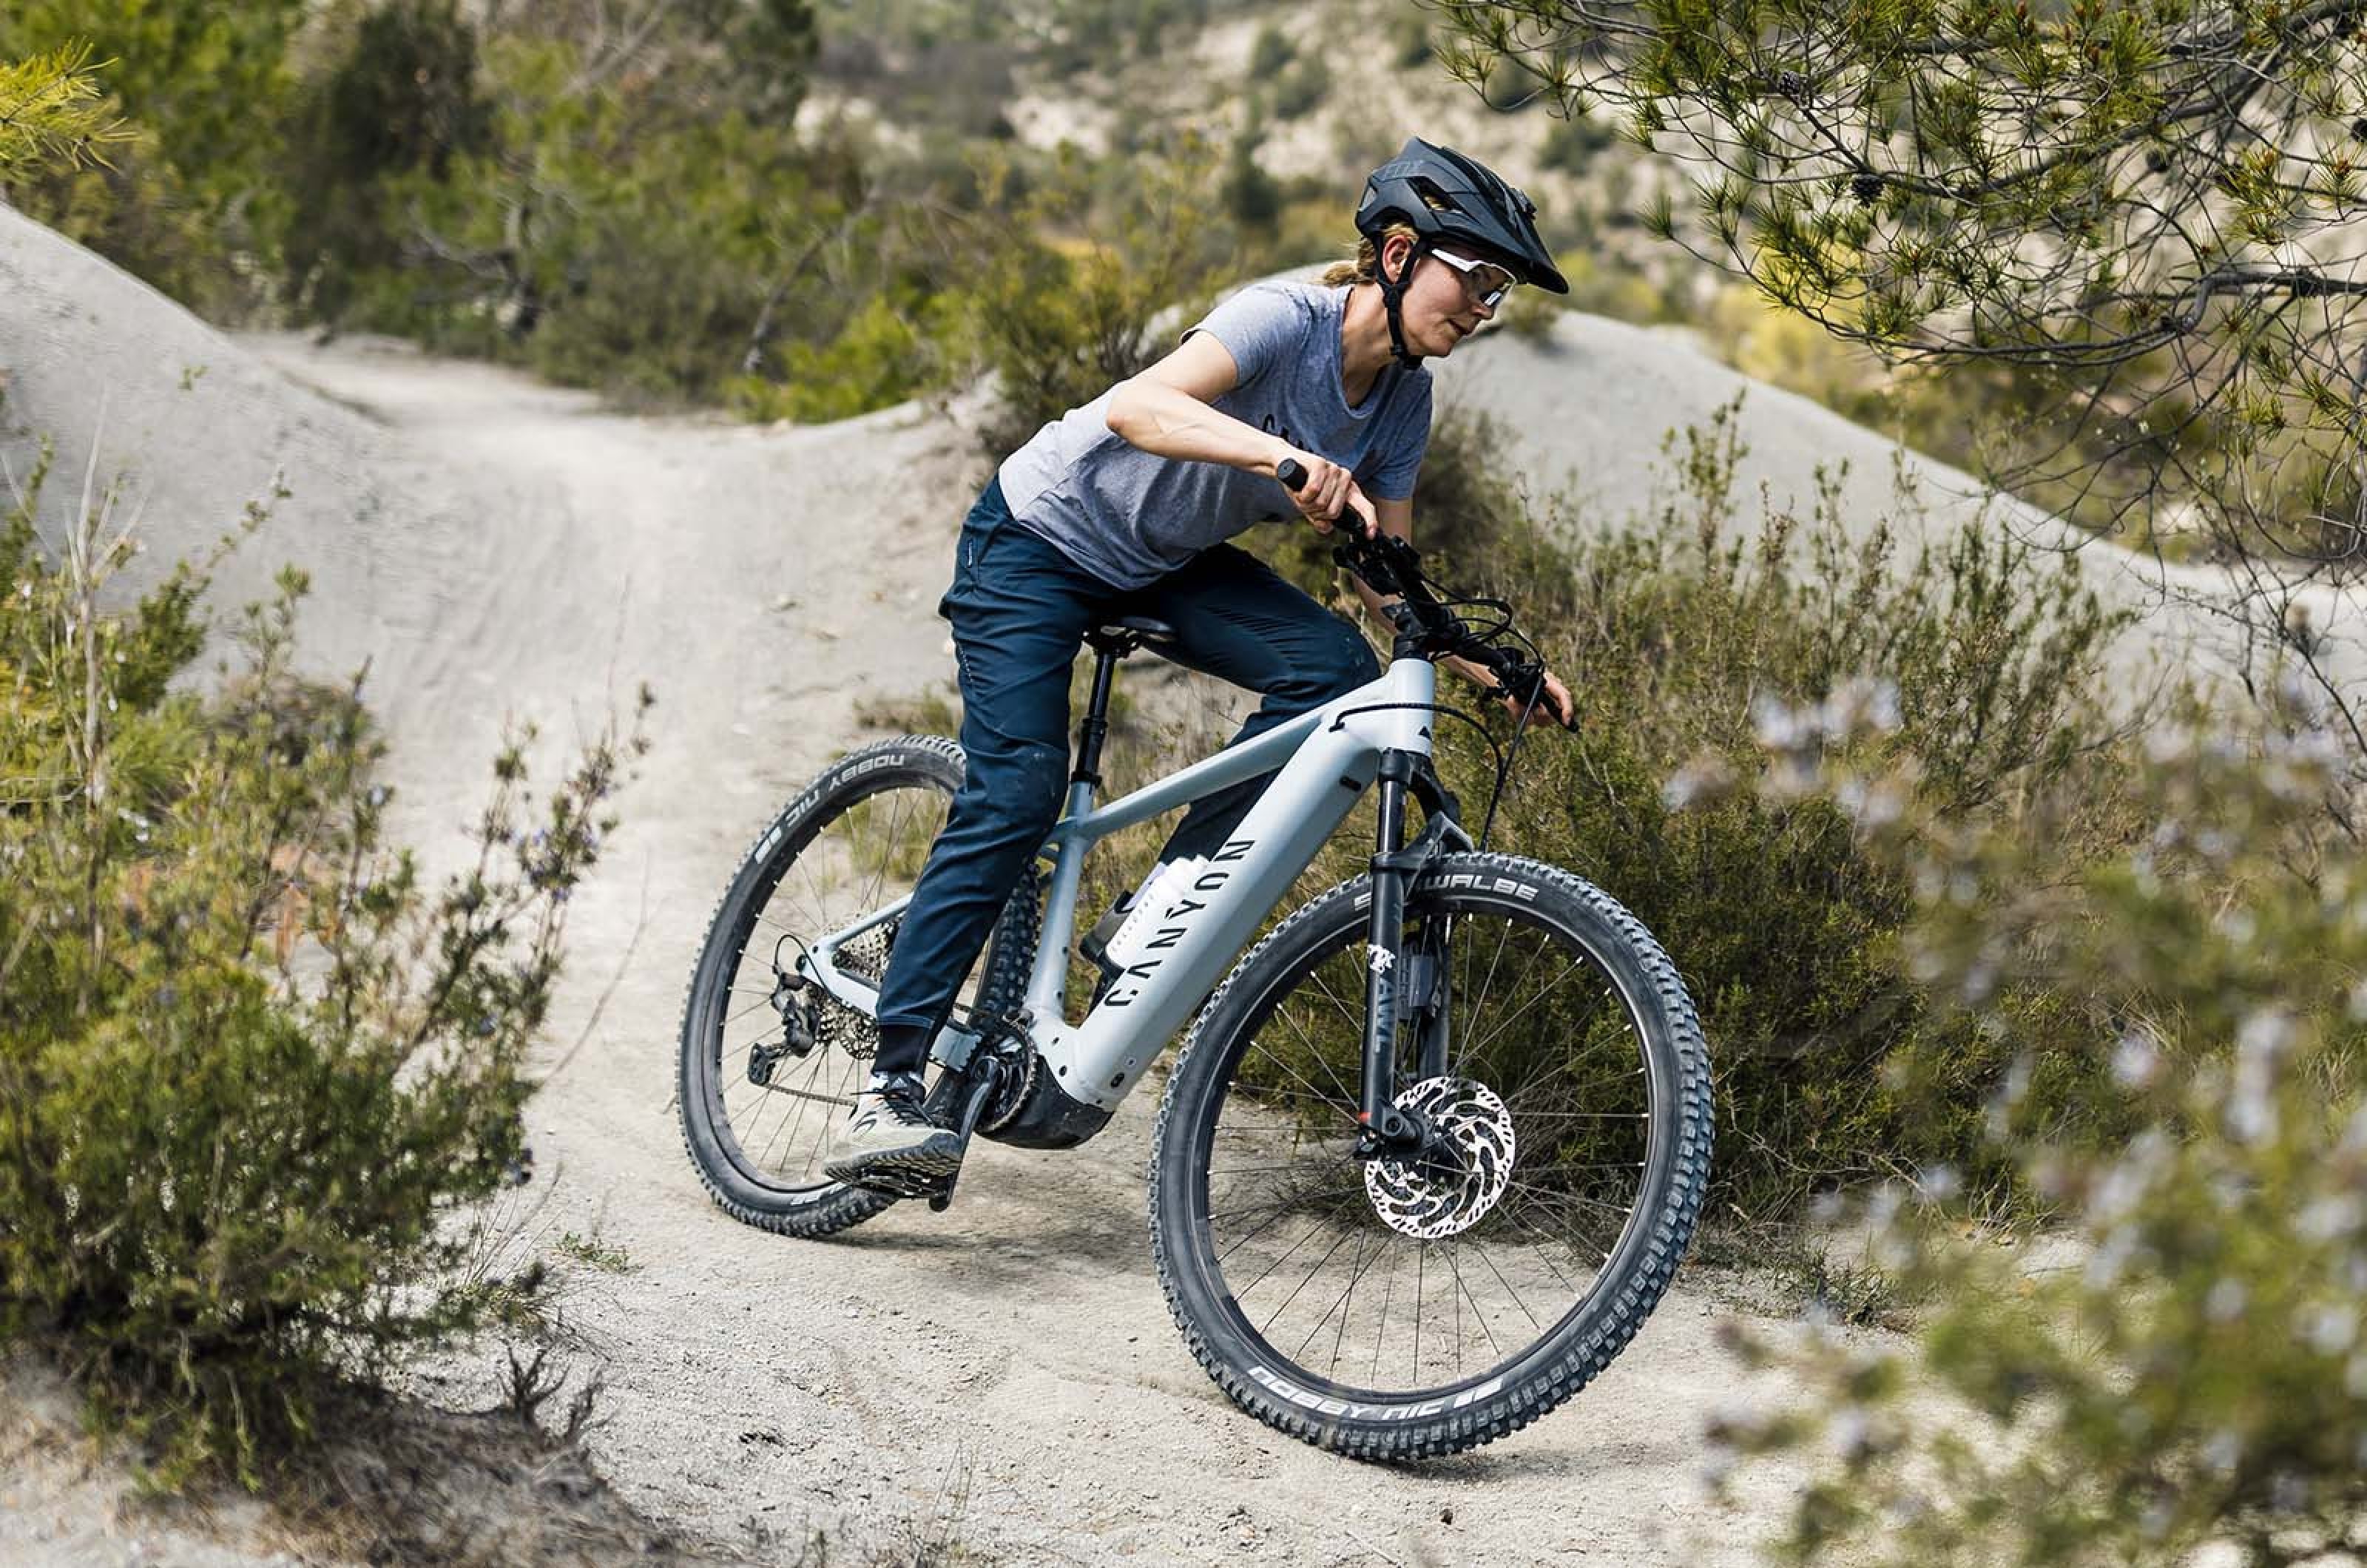 <p>Newly launched and re-invigorated, the Grand Canyon:ON is more of a hybrid hardtail than a hardcore eMTB, but it’s a very accessible way of getting into electric mountain biking. With 120mm of front travel, it’s enough to take in most trail routes, just leave it at home for the black diamond stuff. </p>  <p>The Grand Canyon:ON range is powered by Shimano STEPS drive systems with a 630Wh battery so you can ride for longer. They’re also quite affordable, too, with prices starting at £2599 for the Grand Canyon:ON 7 model.</p>